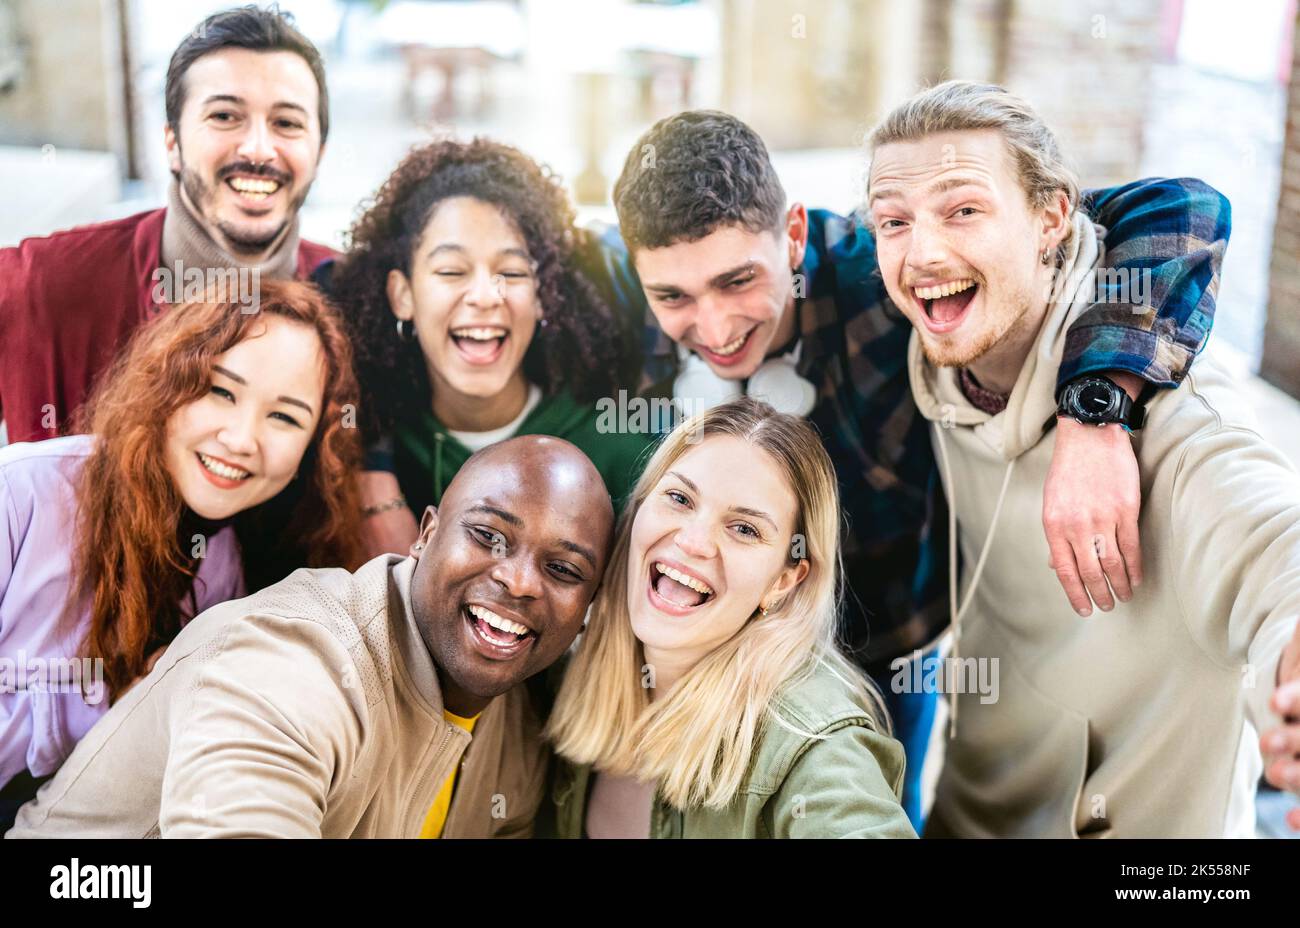 Multicultural guys and girls taking selfie outdoor on urban background - Happy milenial life style concept with young multiethnic trendy people having Stock Photo